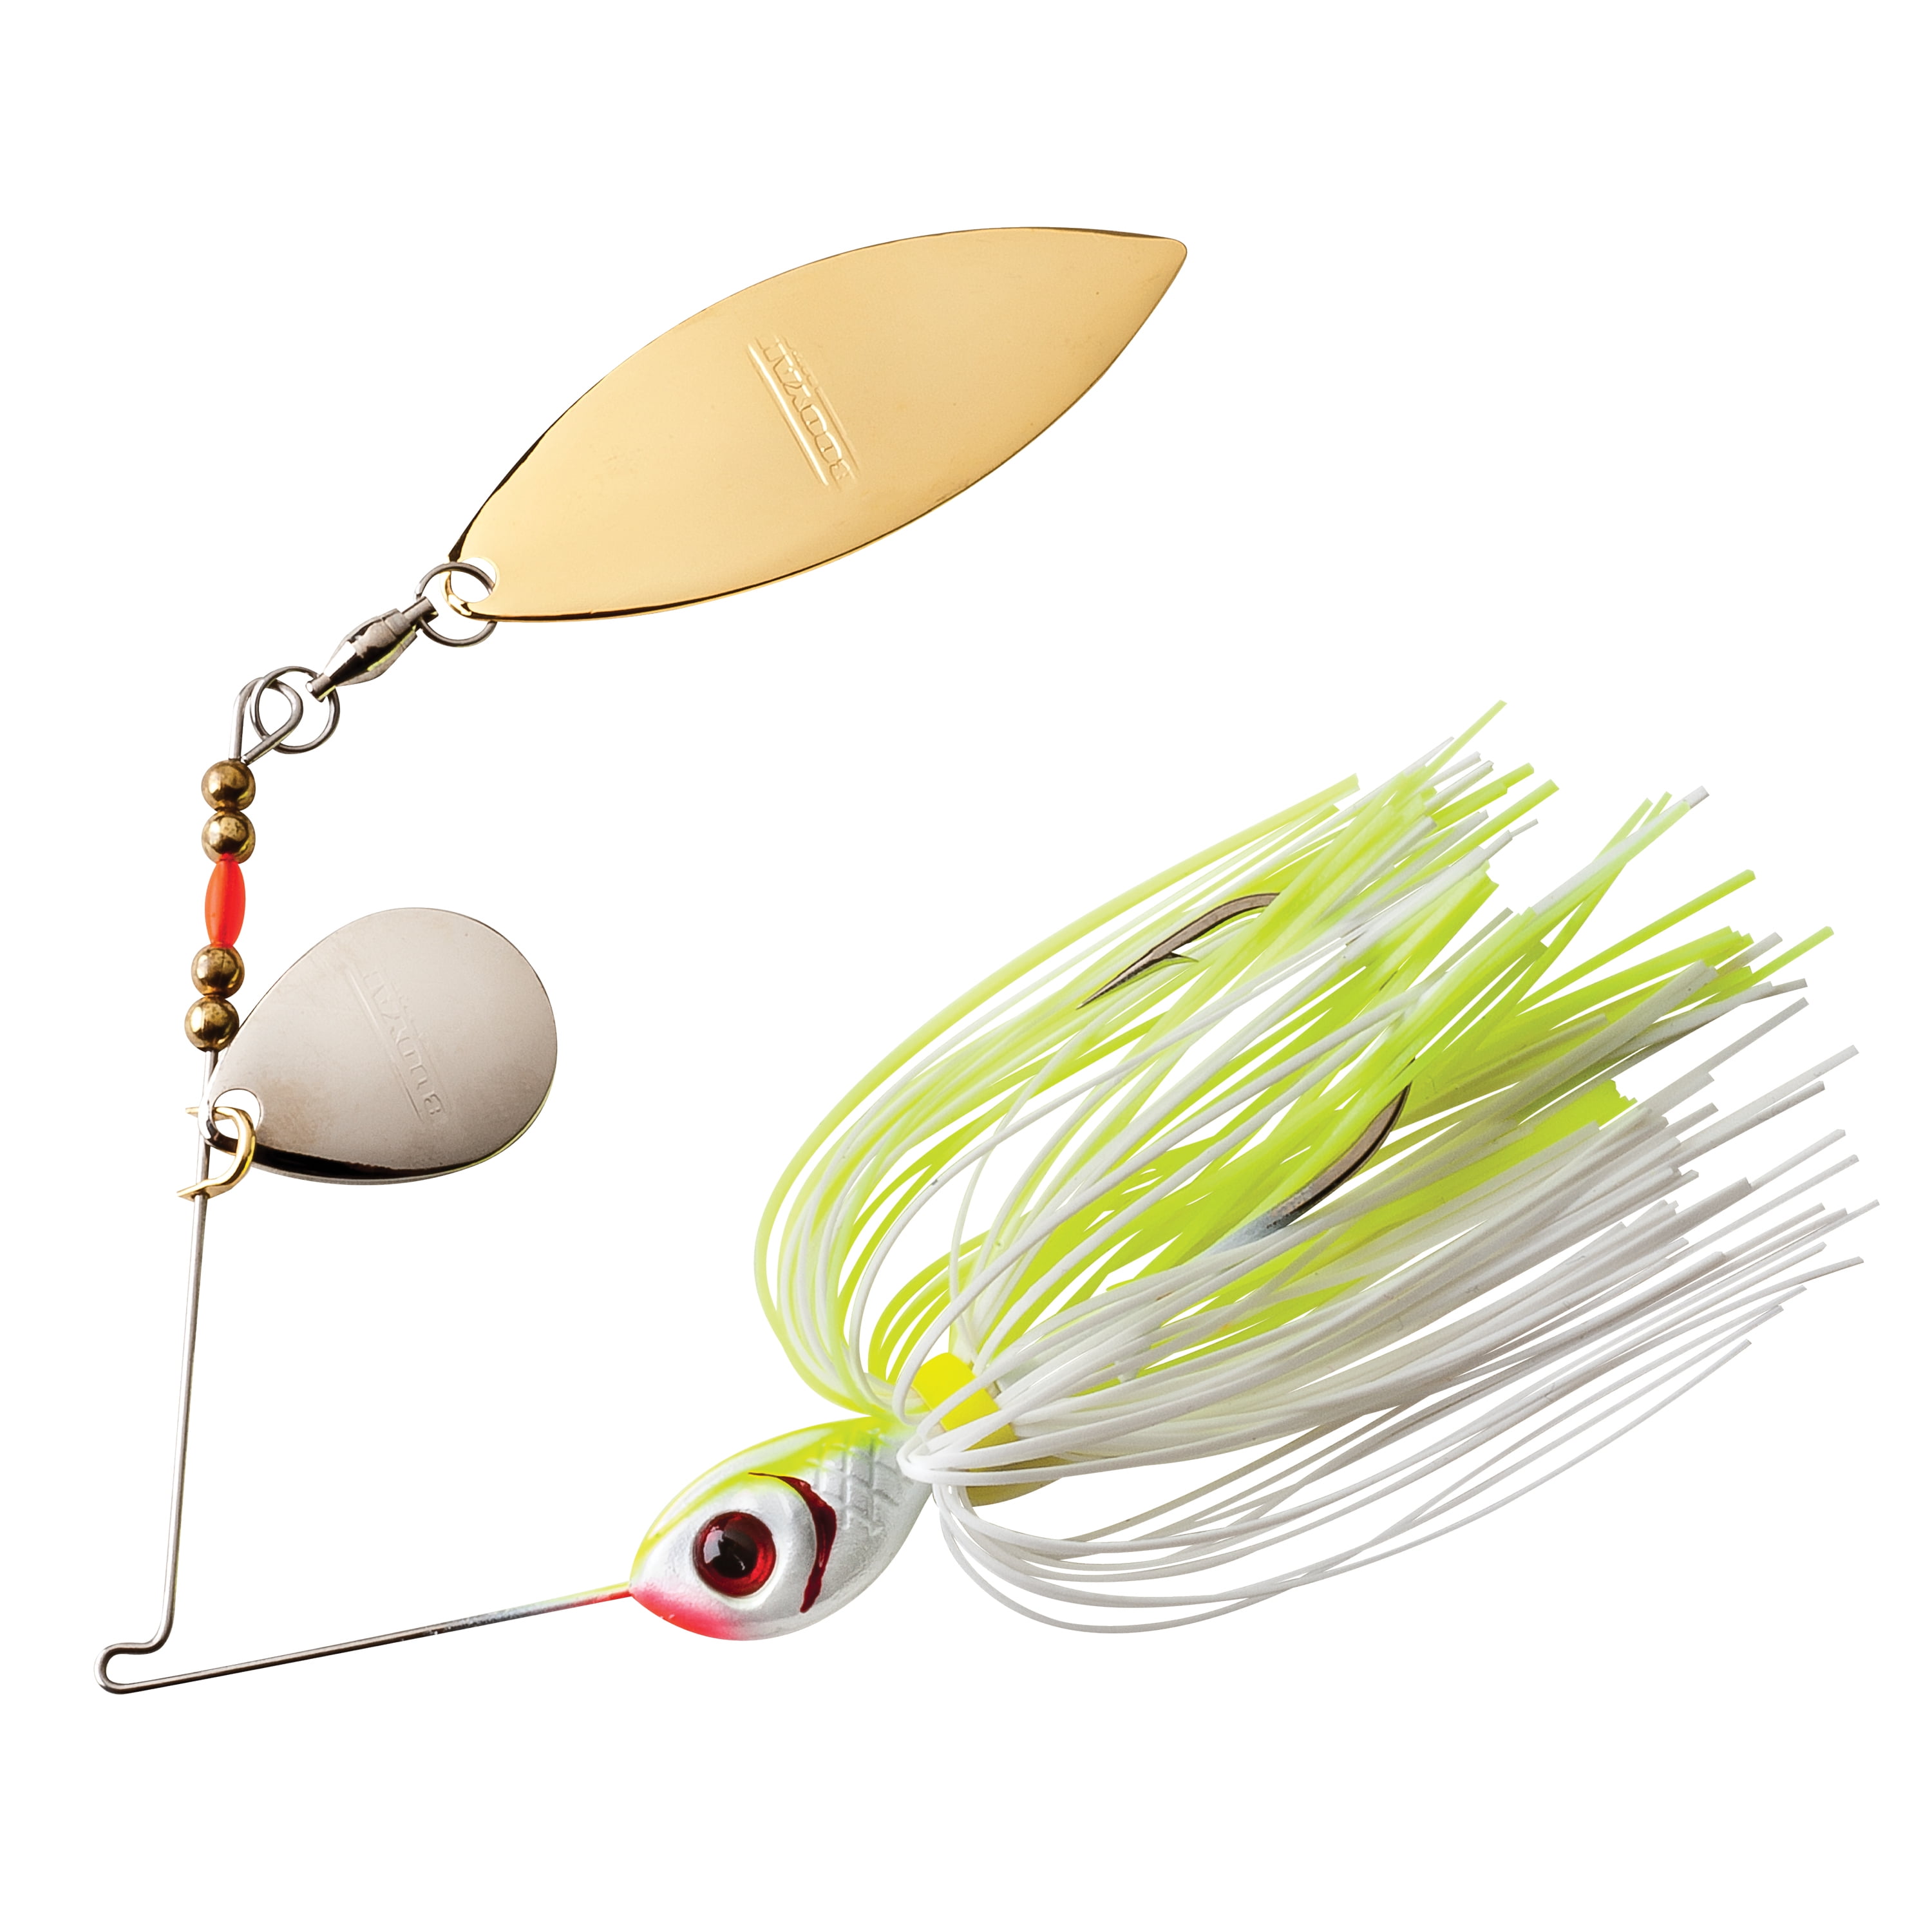 Details about   ELITE SPINNERBAIT  1/2oz  SUPER QUAD  CHARTREUSE SHAD with NICKEL & BRASS BLADES 